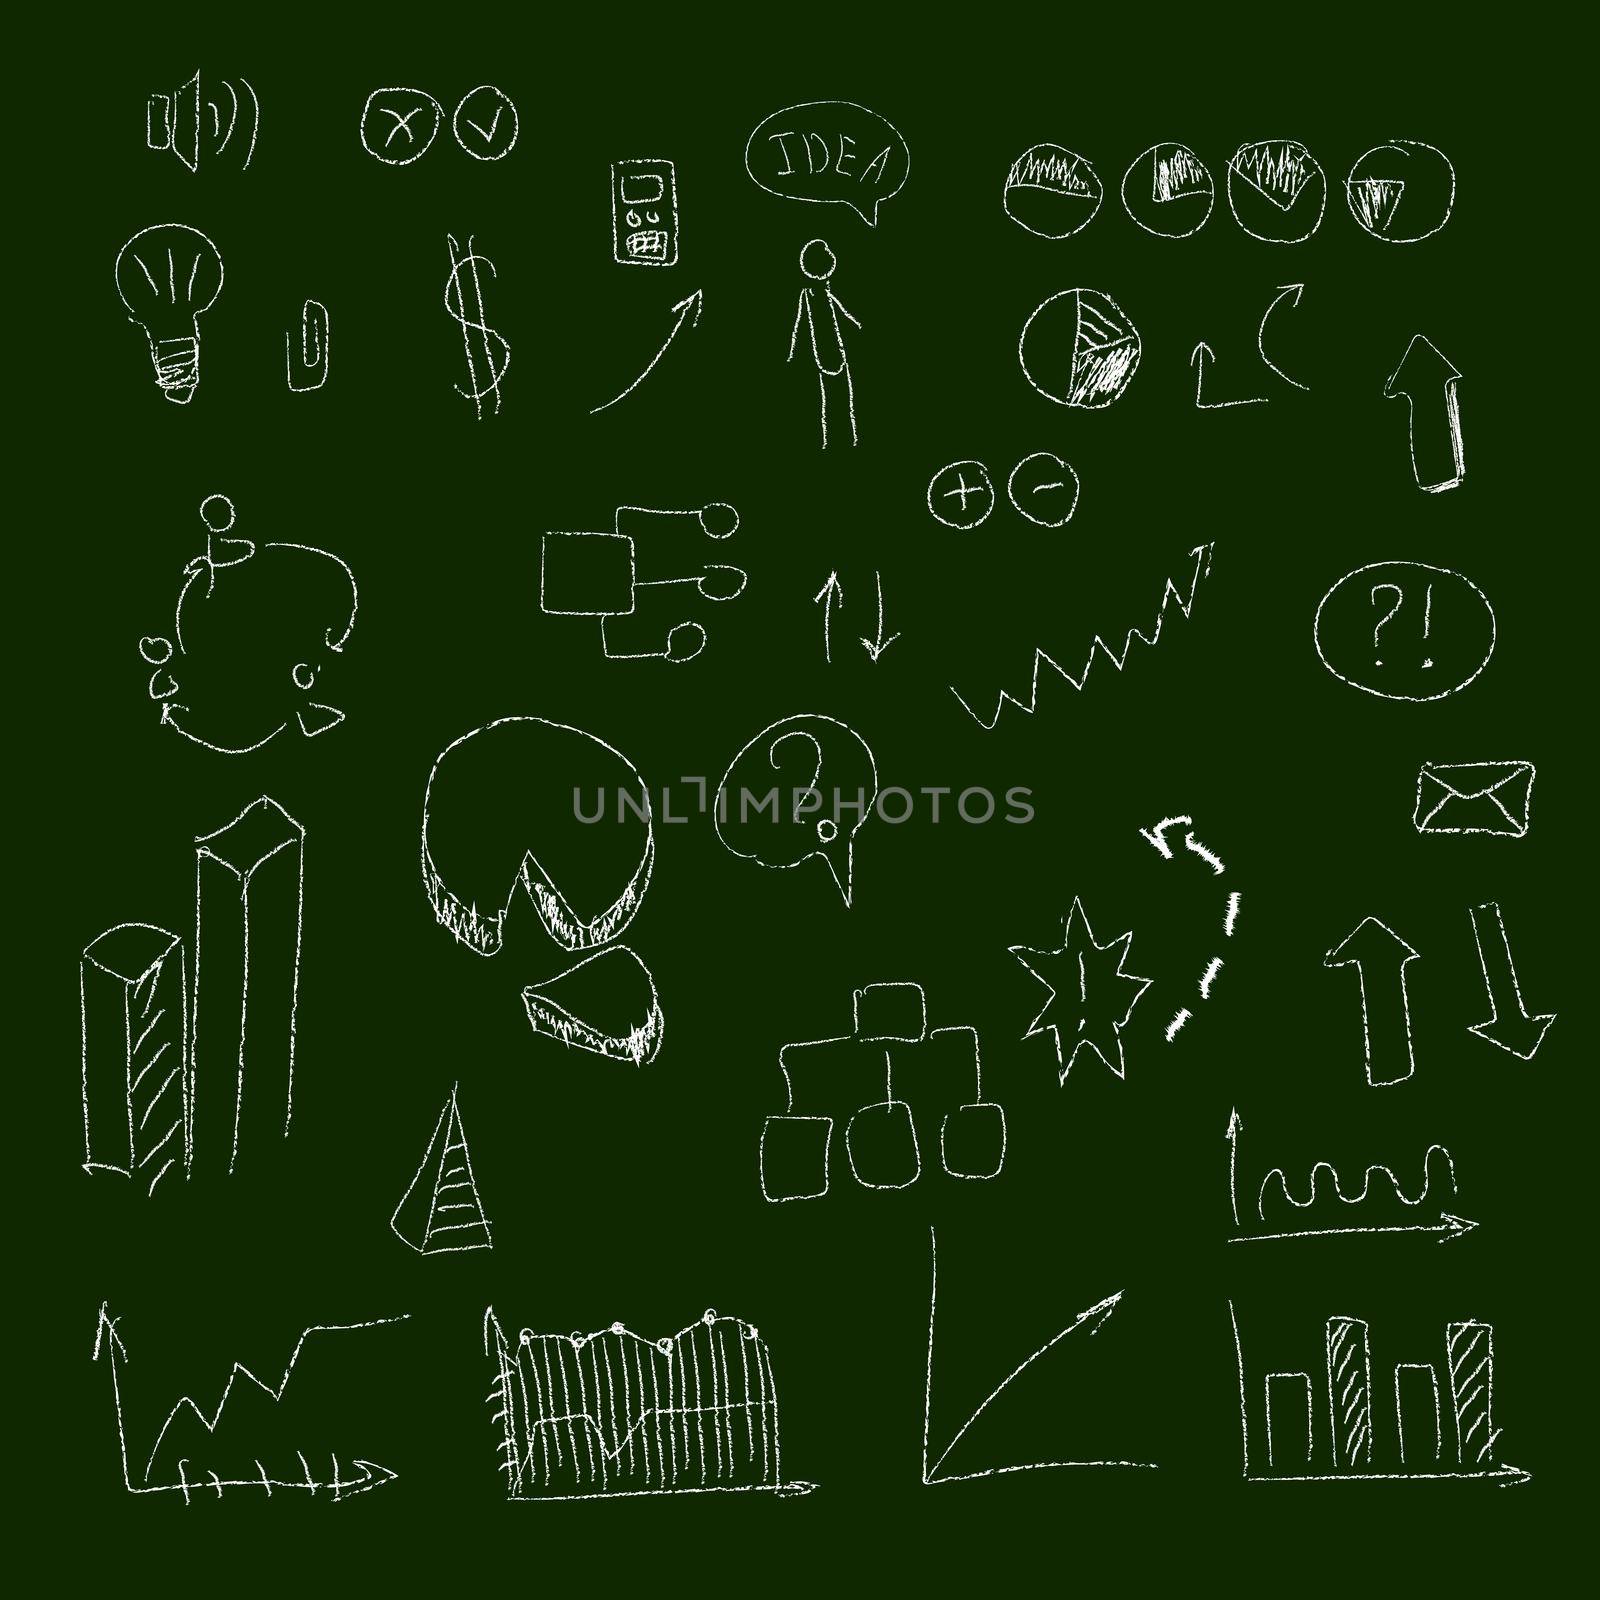 Set of hand drown icons, on chalkboard, for creating business concepts and illustrating ideas by Alxyzt